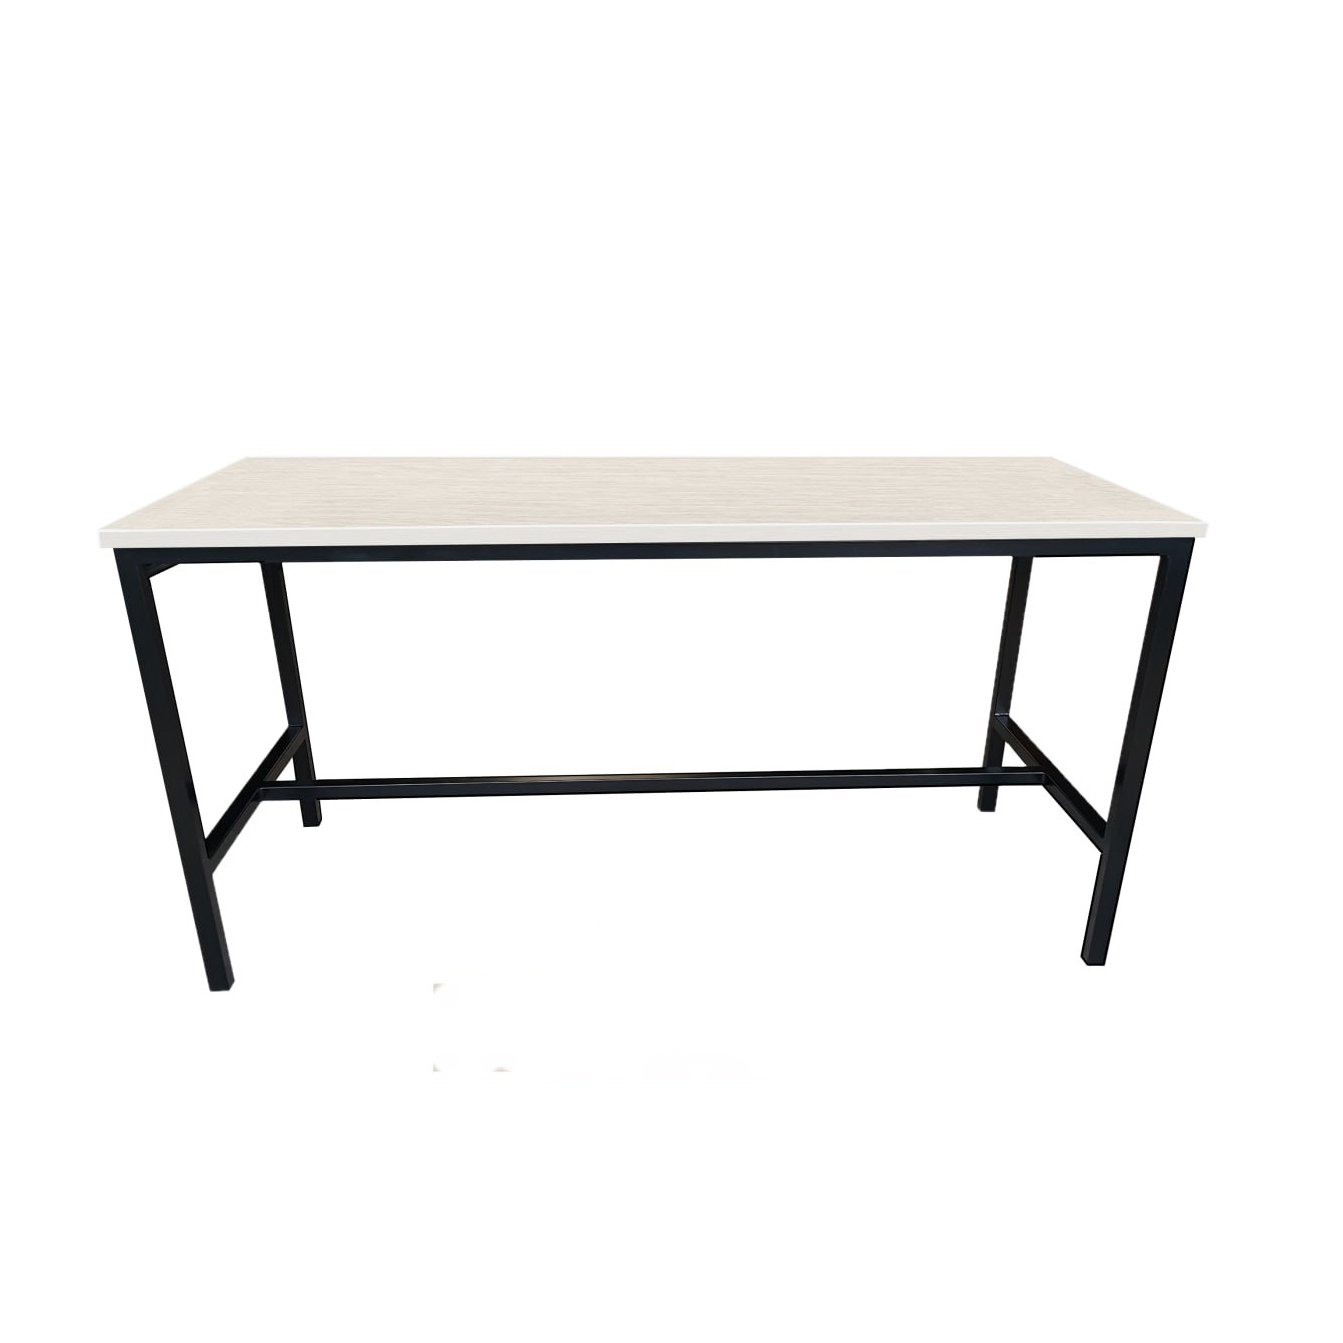 Alex P1 Bar Table with H Support & Laminex Top (Alaskan Natural)